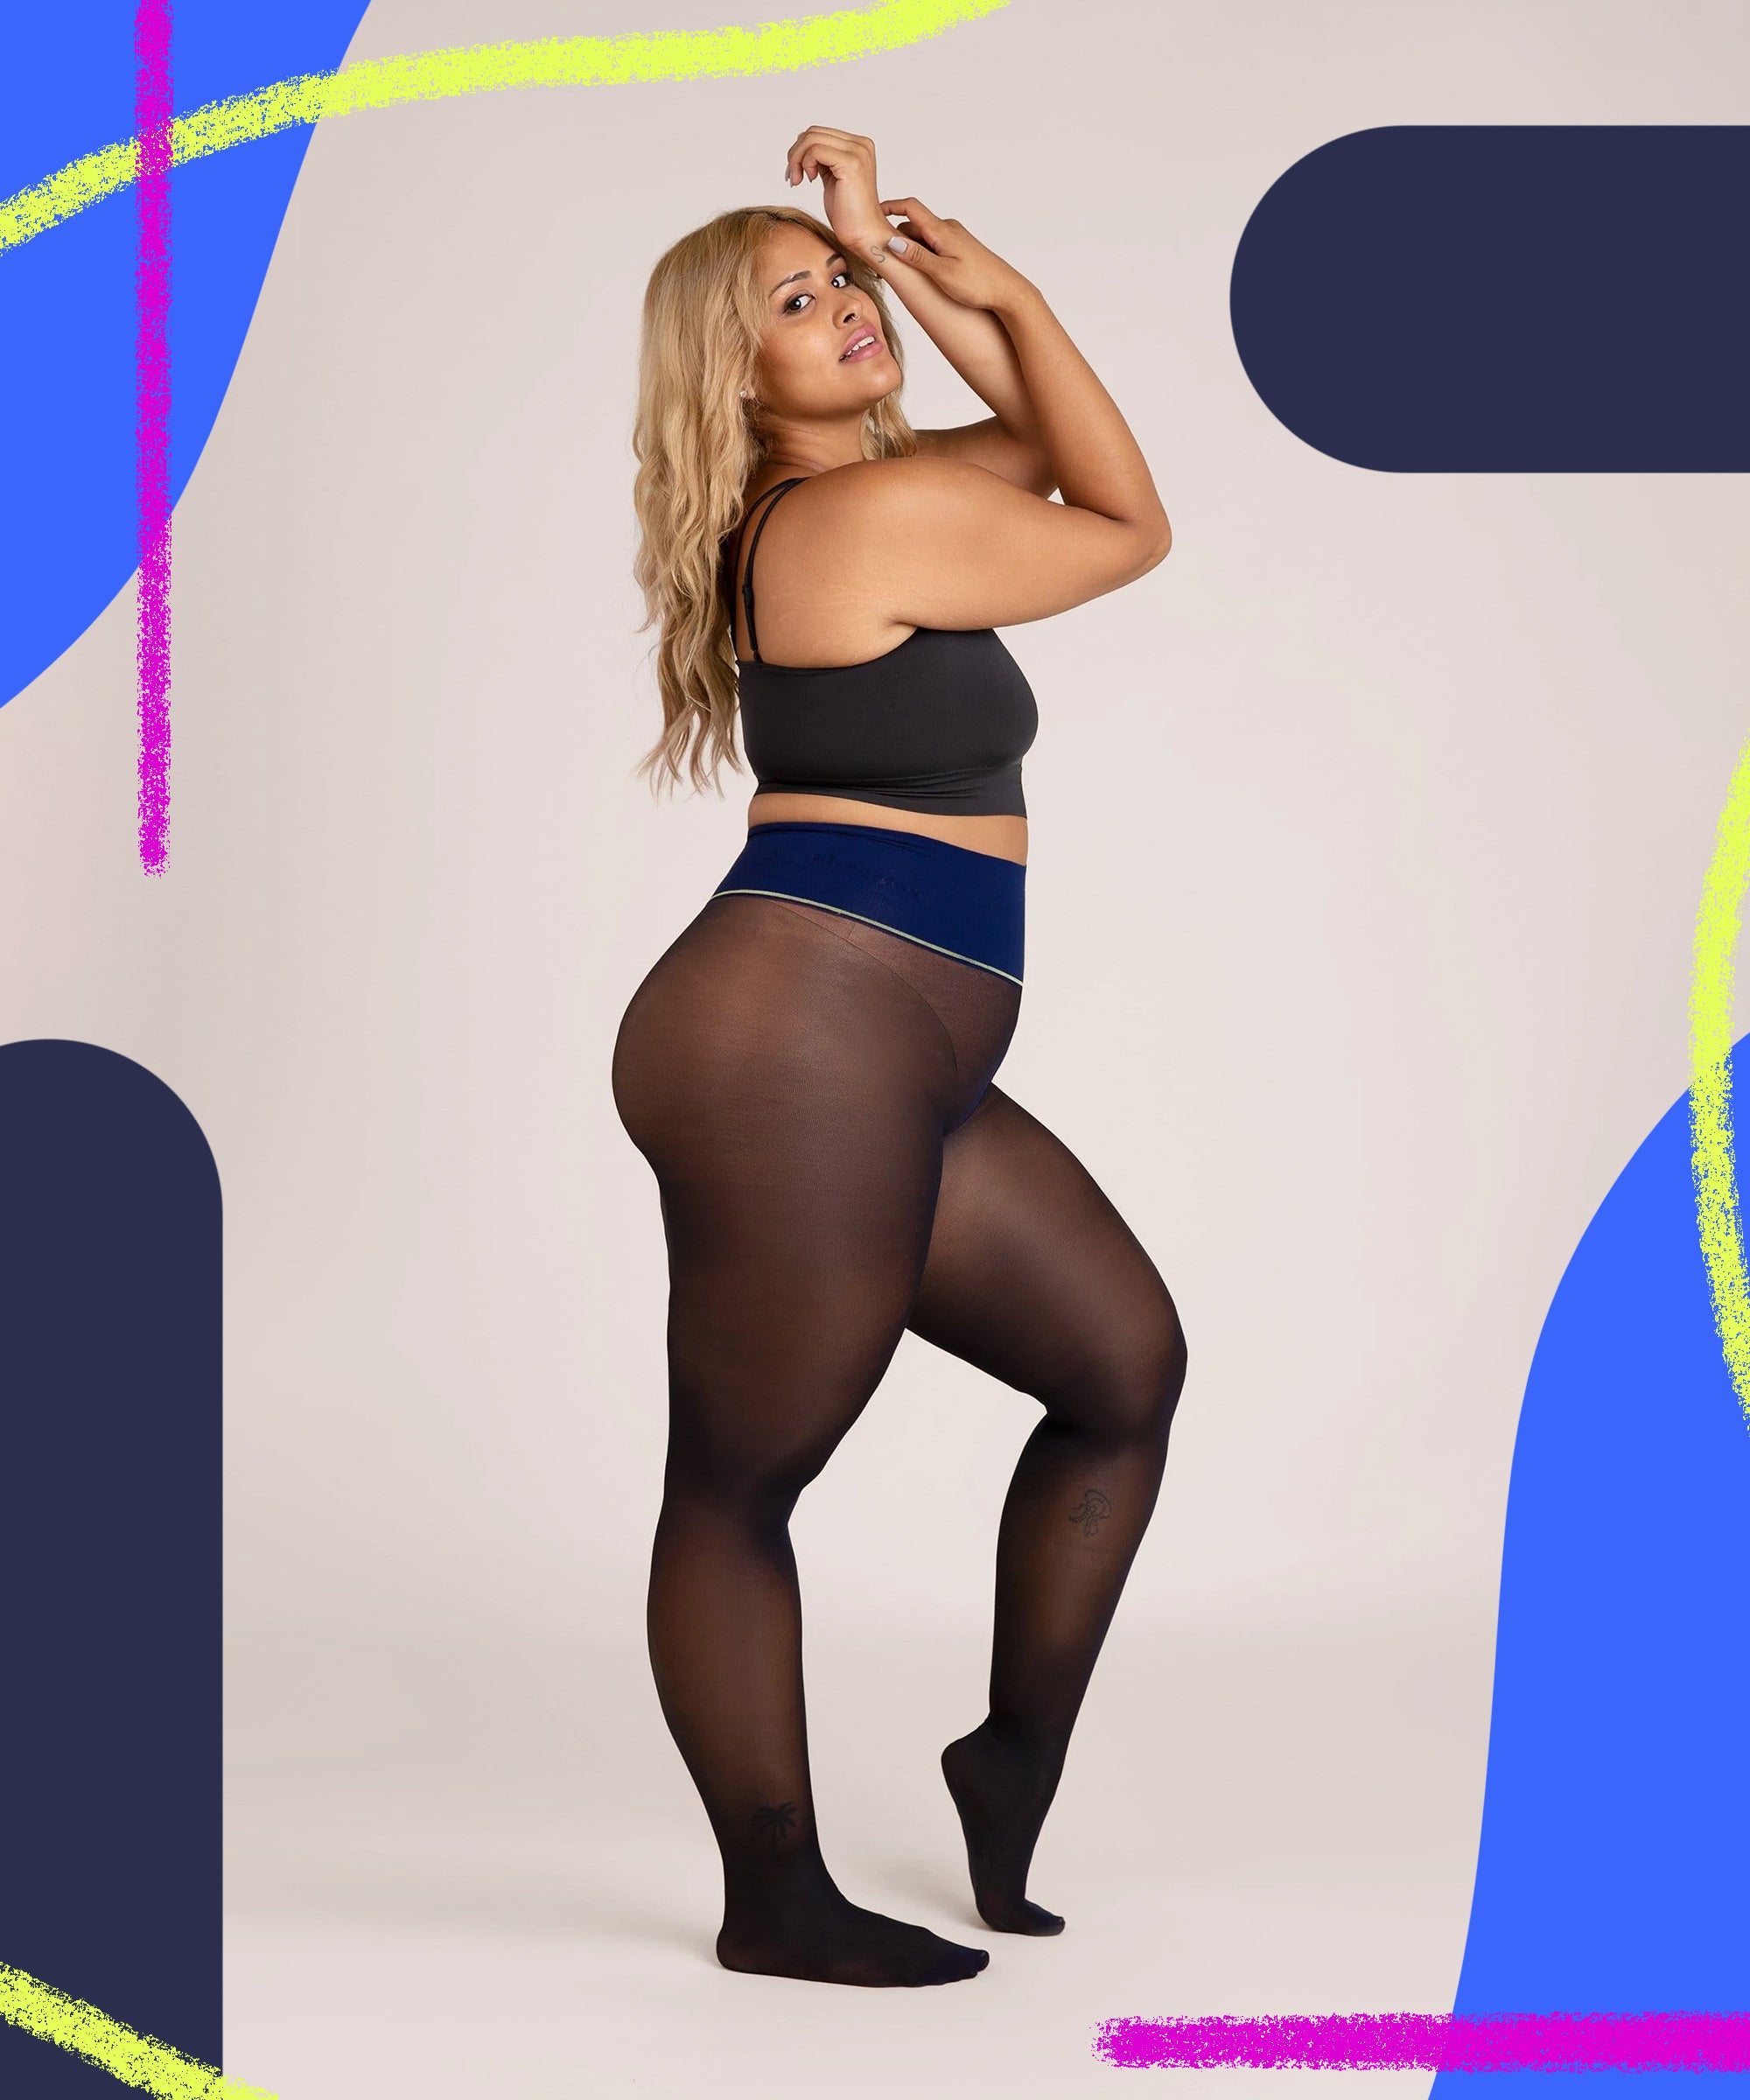 7 Best Nude Tights According To People Of All Skin Tones